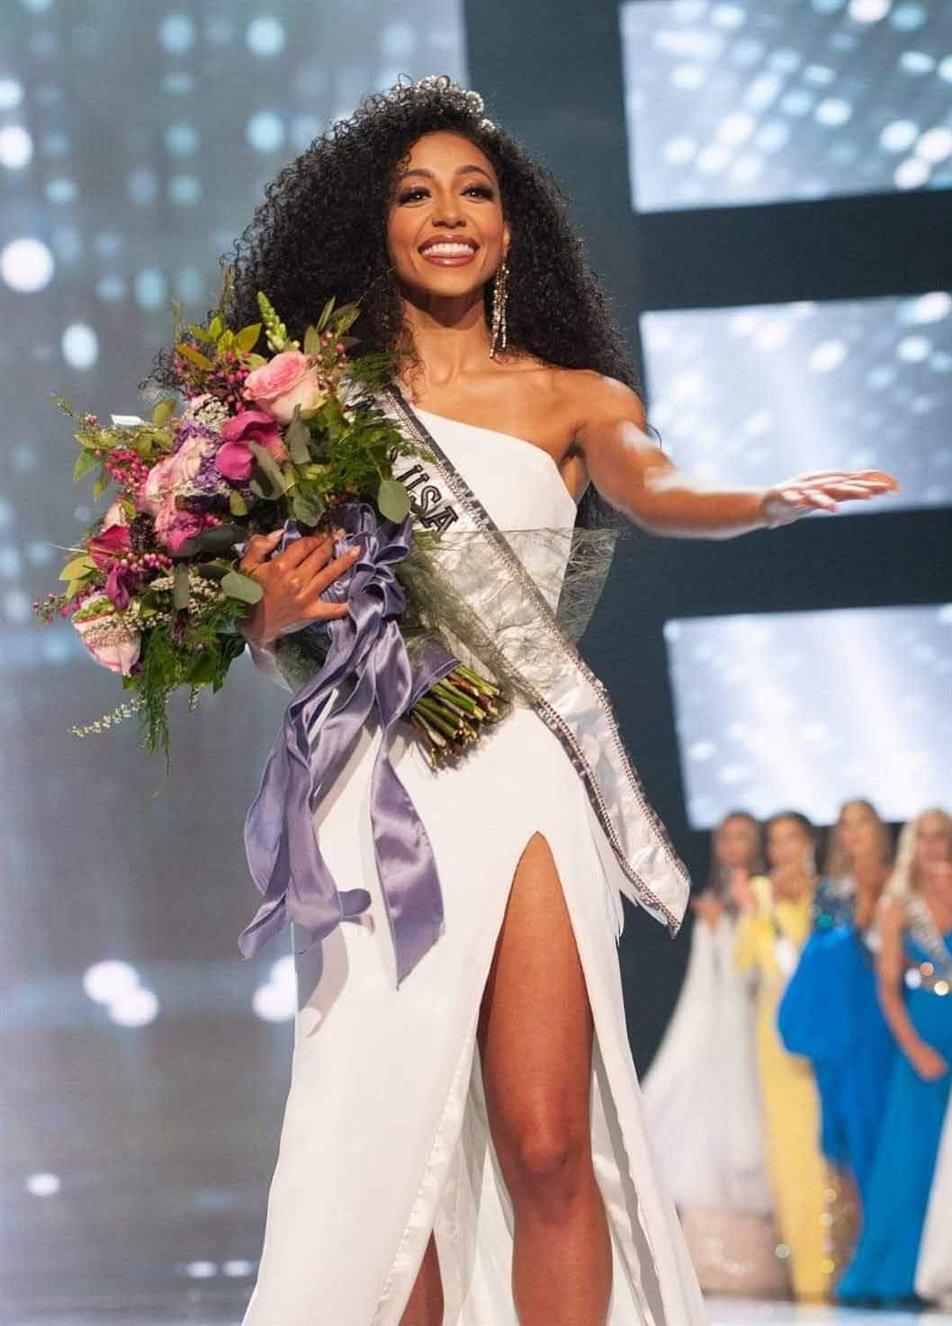 Miss USA 2020 and Miss Teen USA 2020 to be held in the month of November